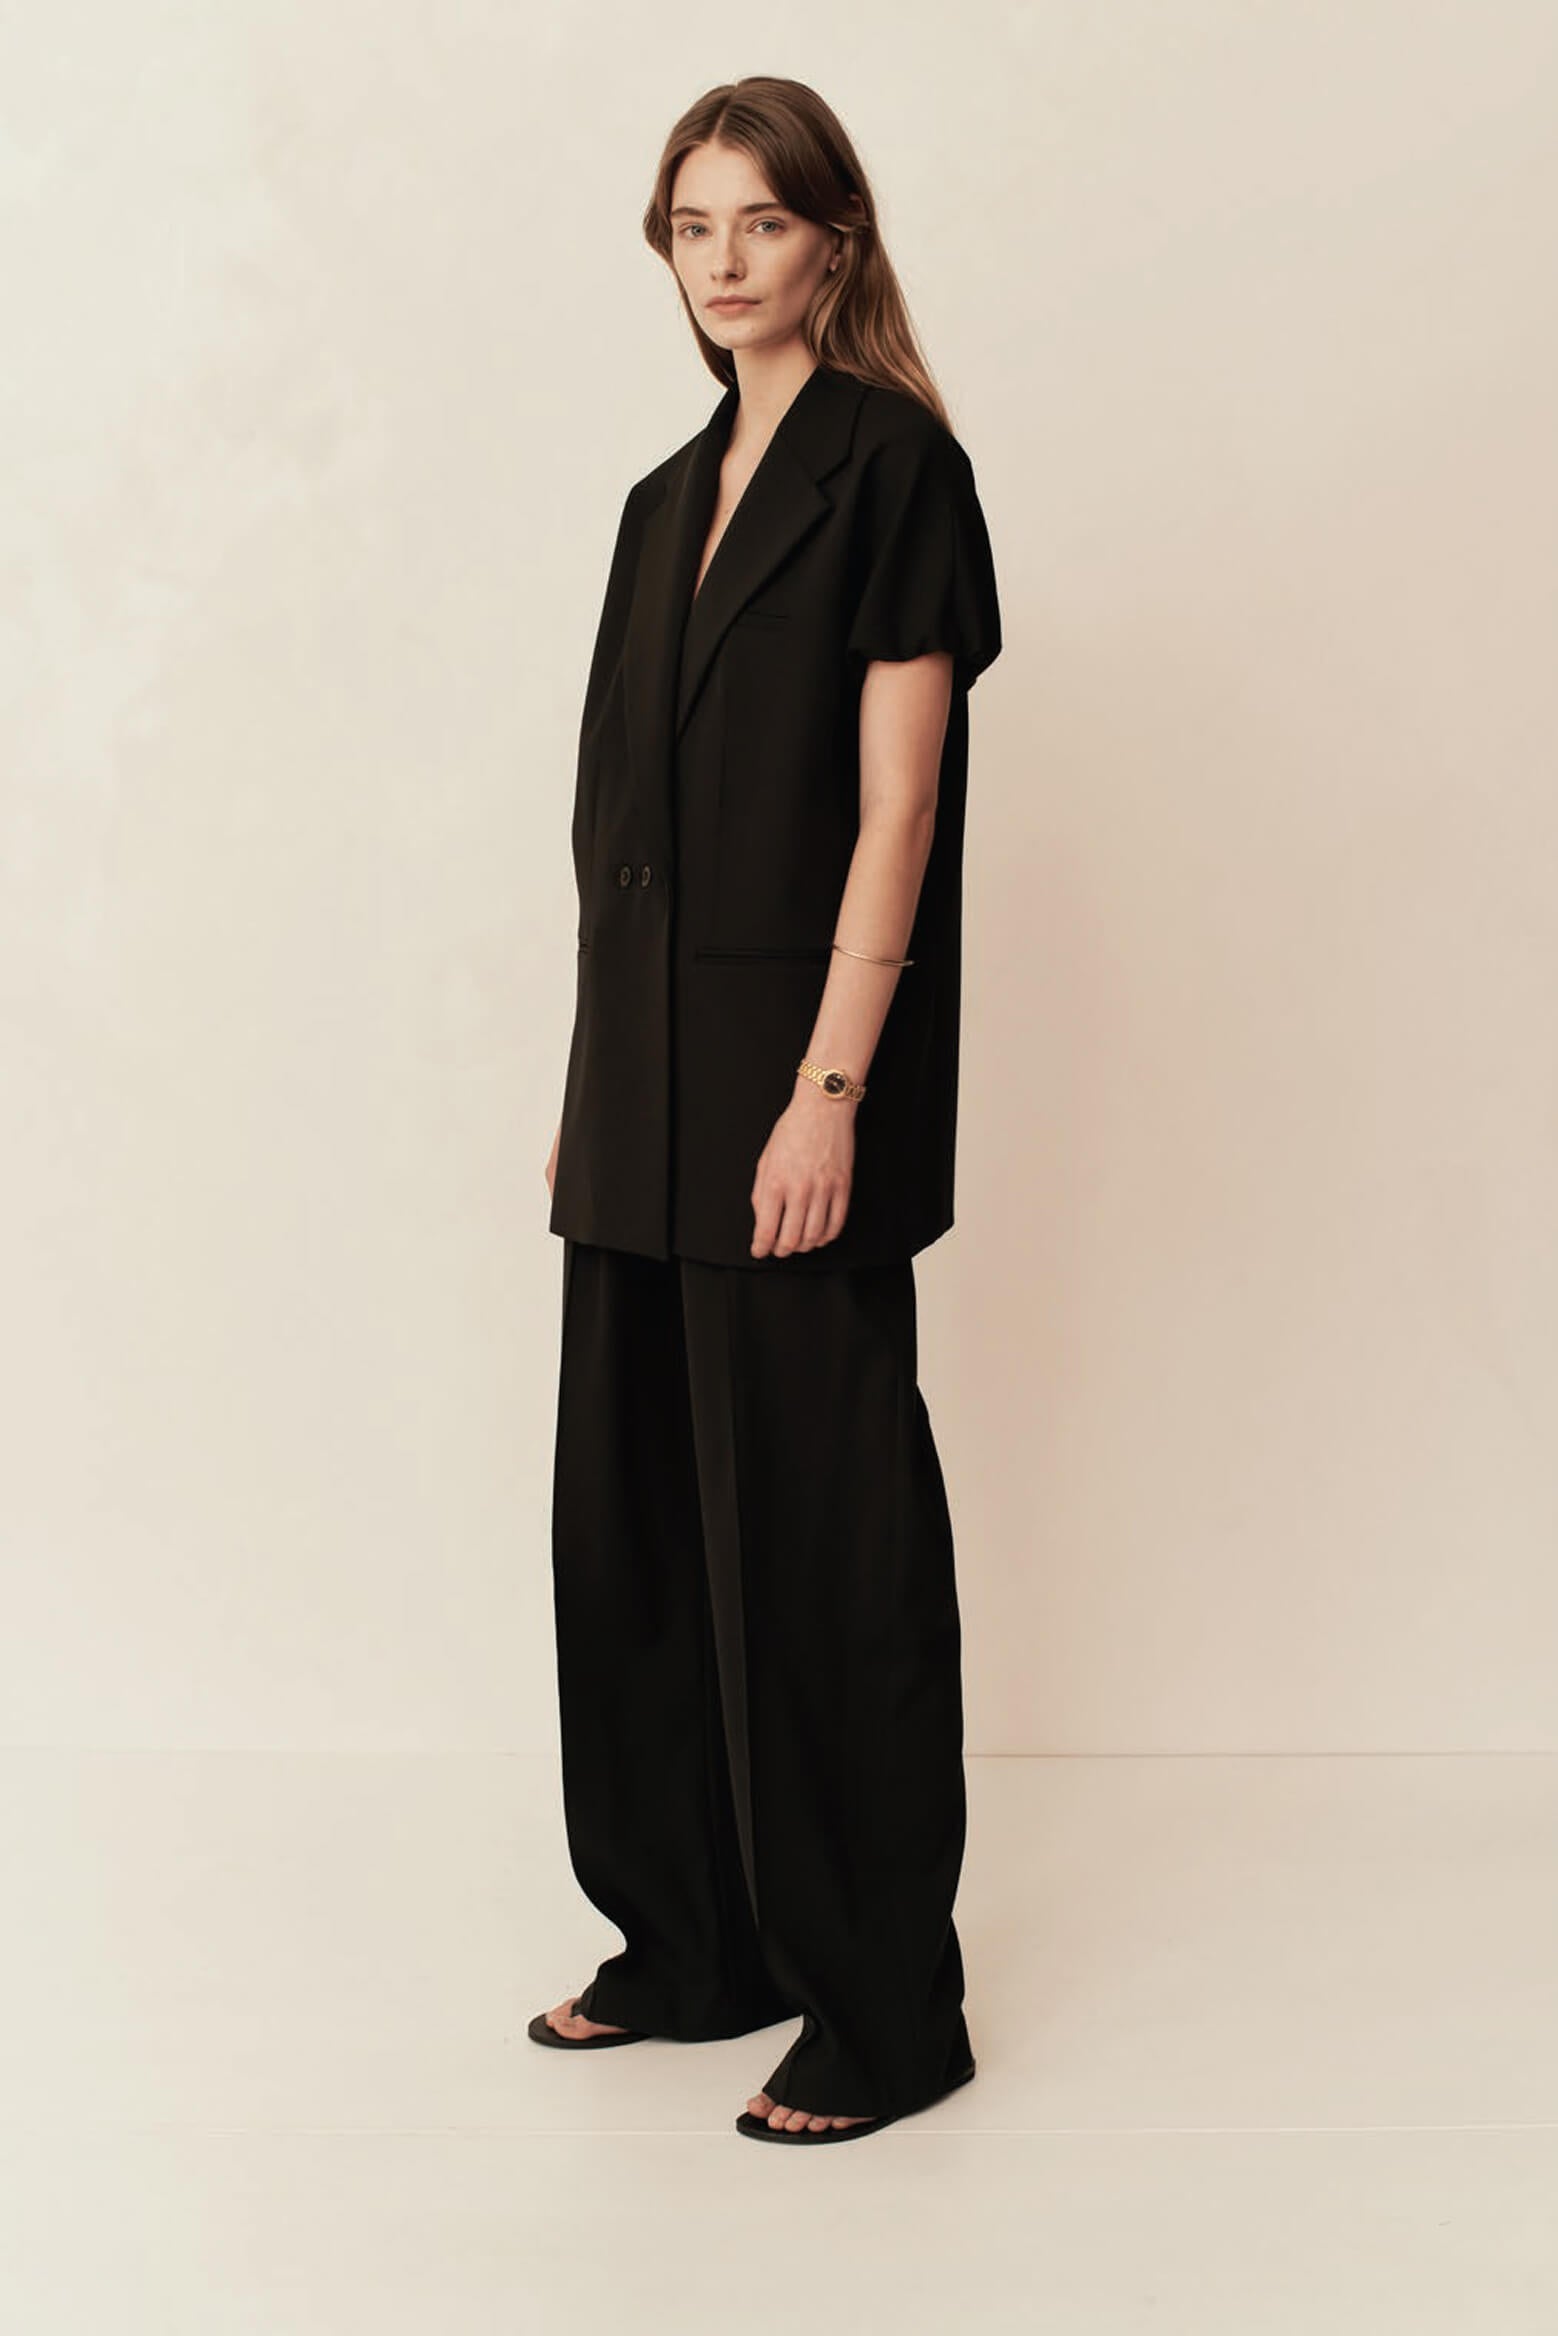 Esse Classico Draw Trousers in Black from The New Trend